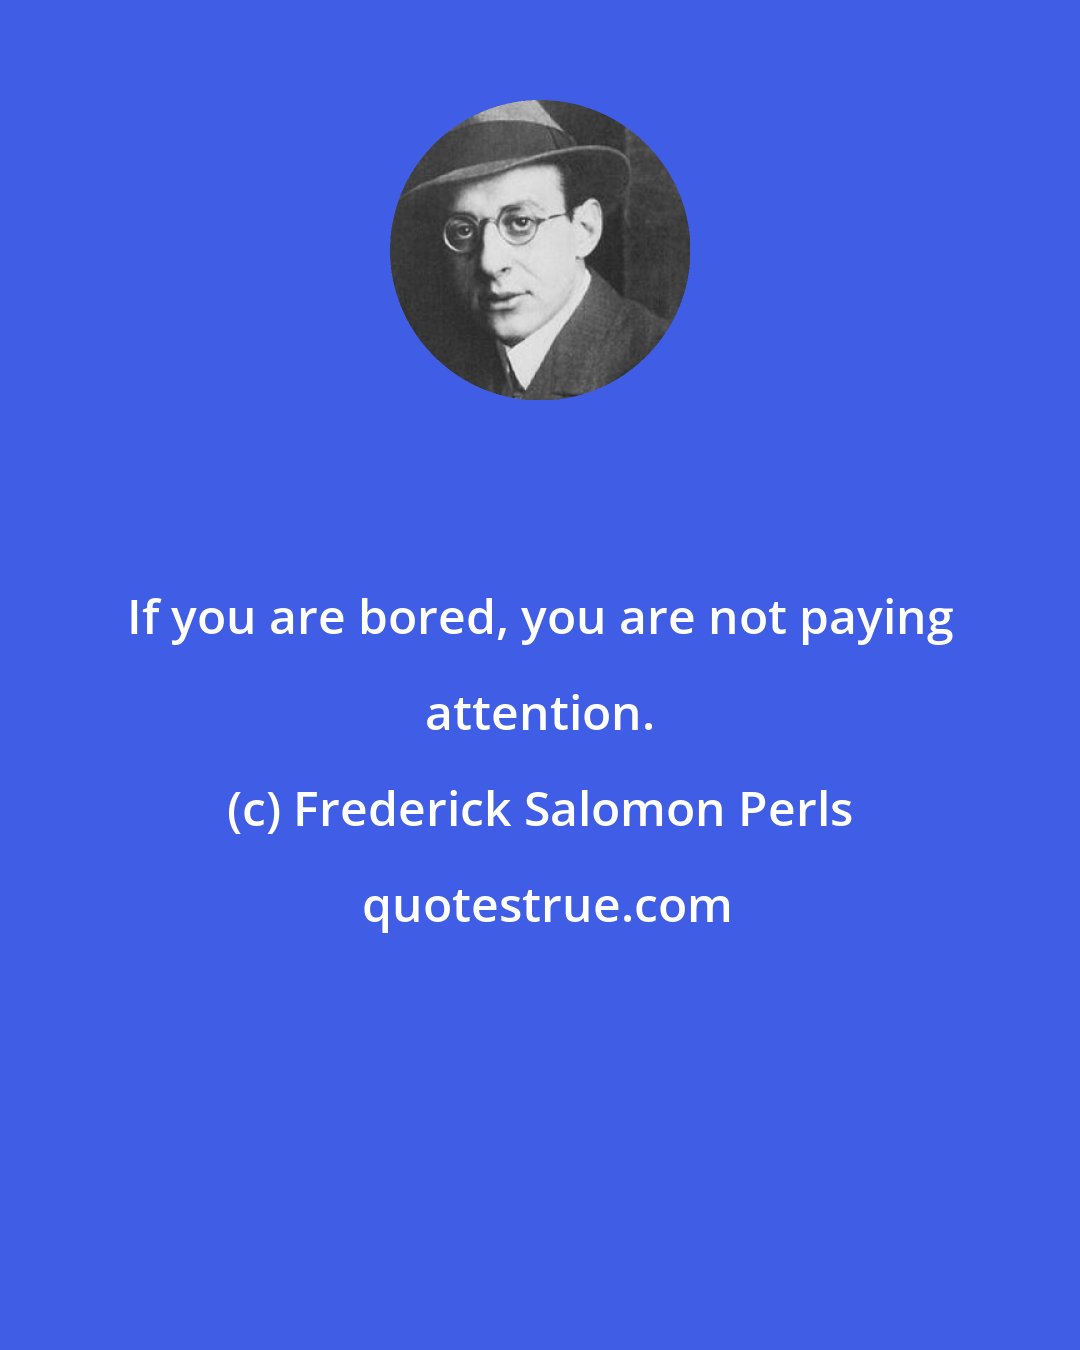 Frederick Salomon Perls: If you are bored, you are not paying attention.